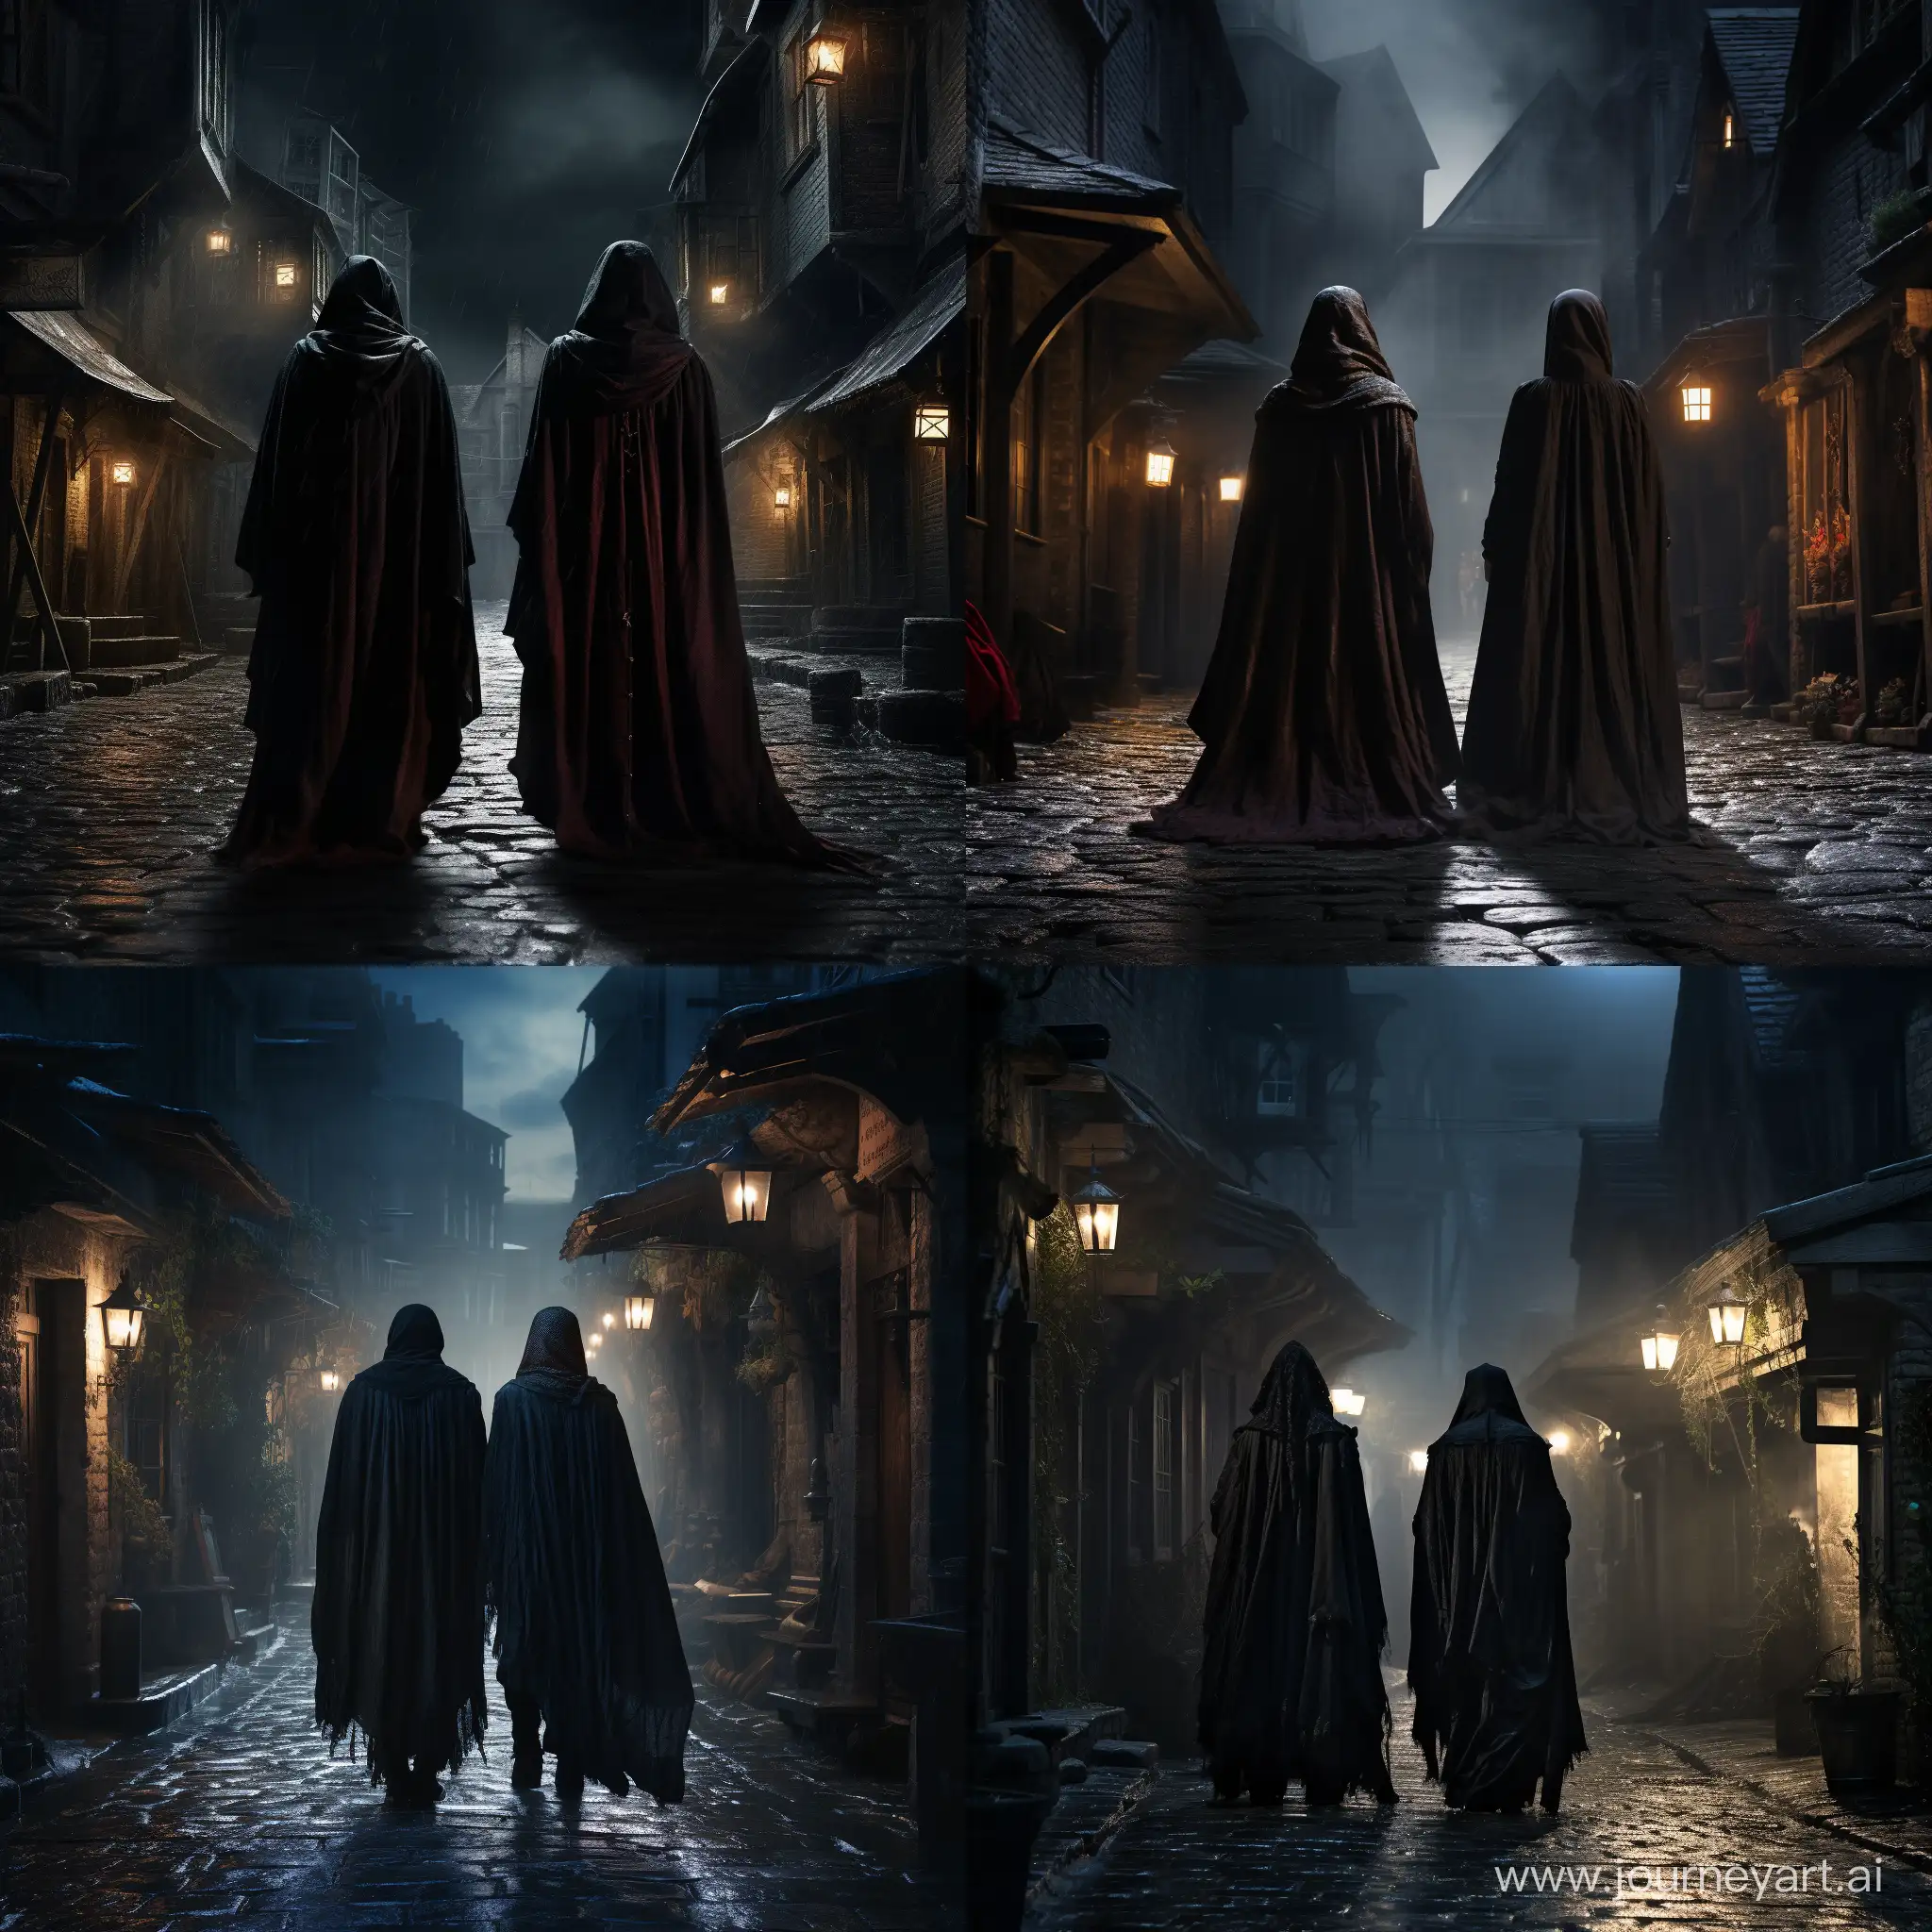 Mysterious-Cloaked-Figures-on-Medieval-Night-Street